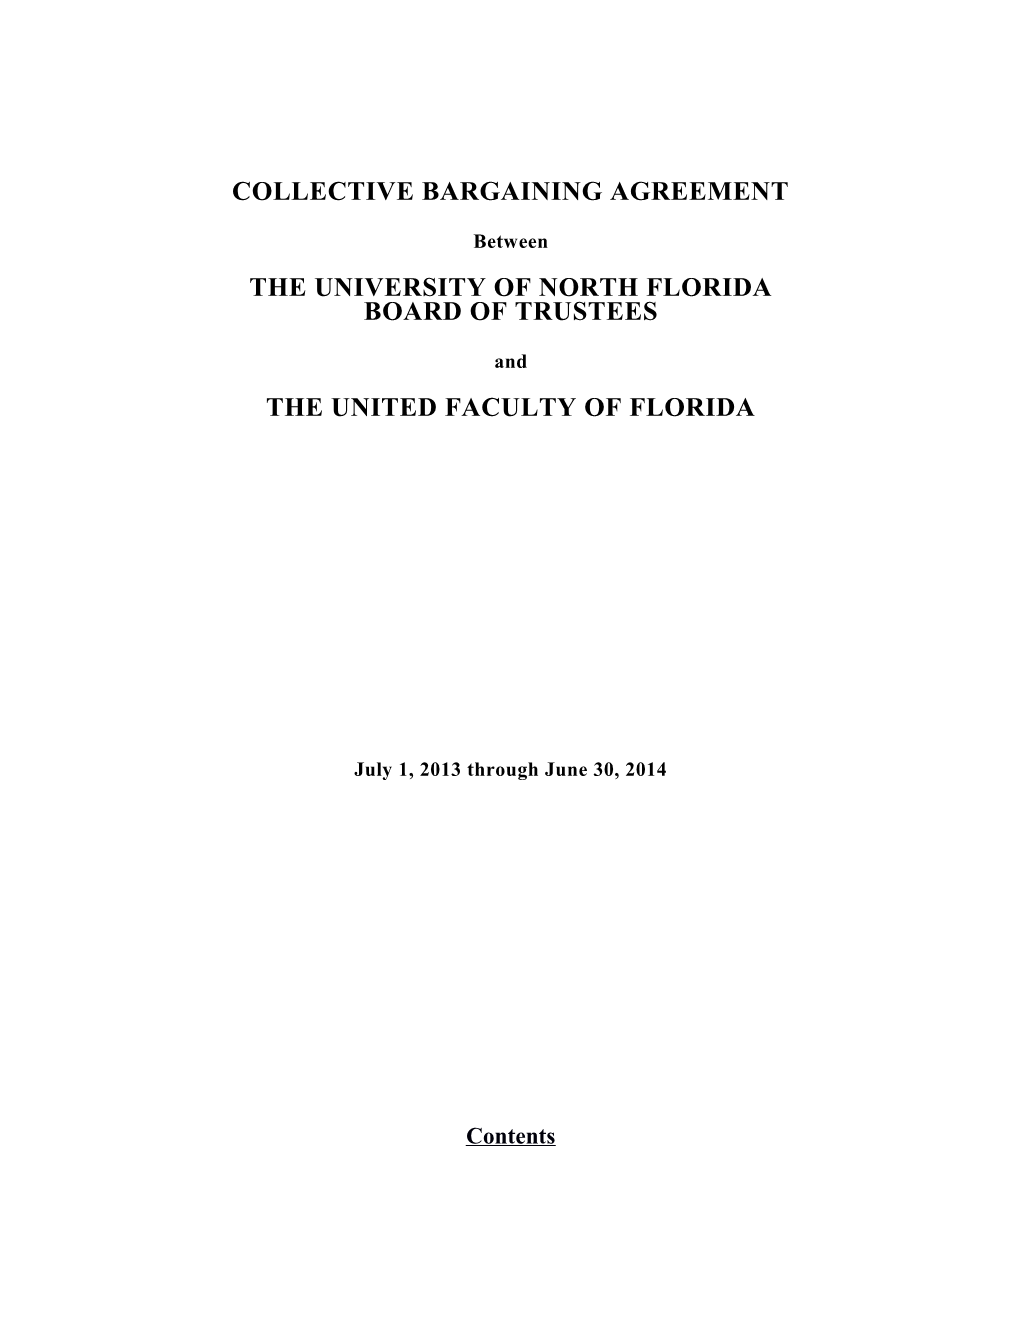 UNF UFF Collective Bargaining Agreement 2013-2014